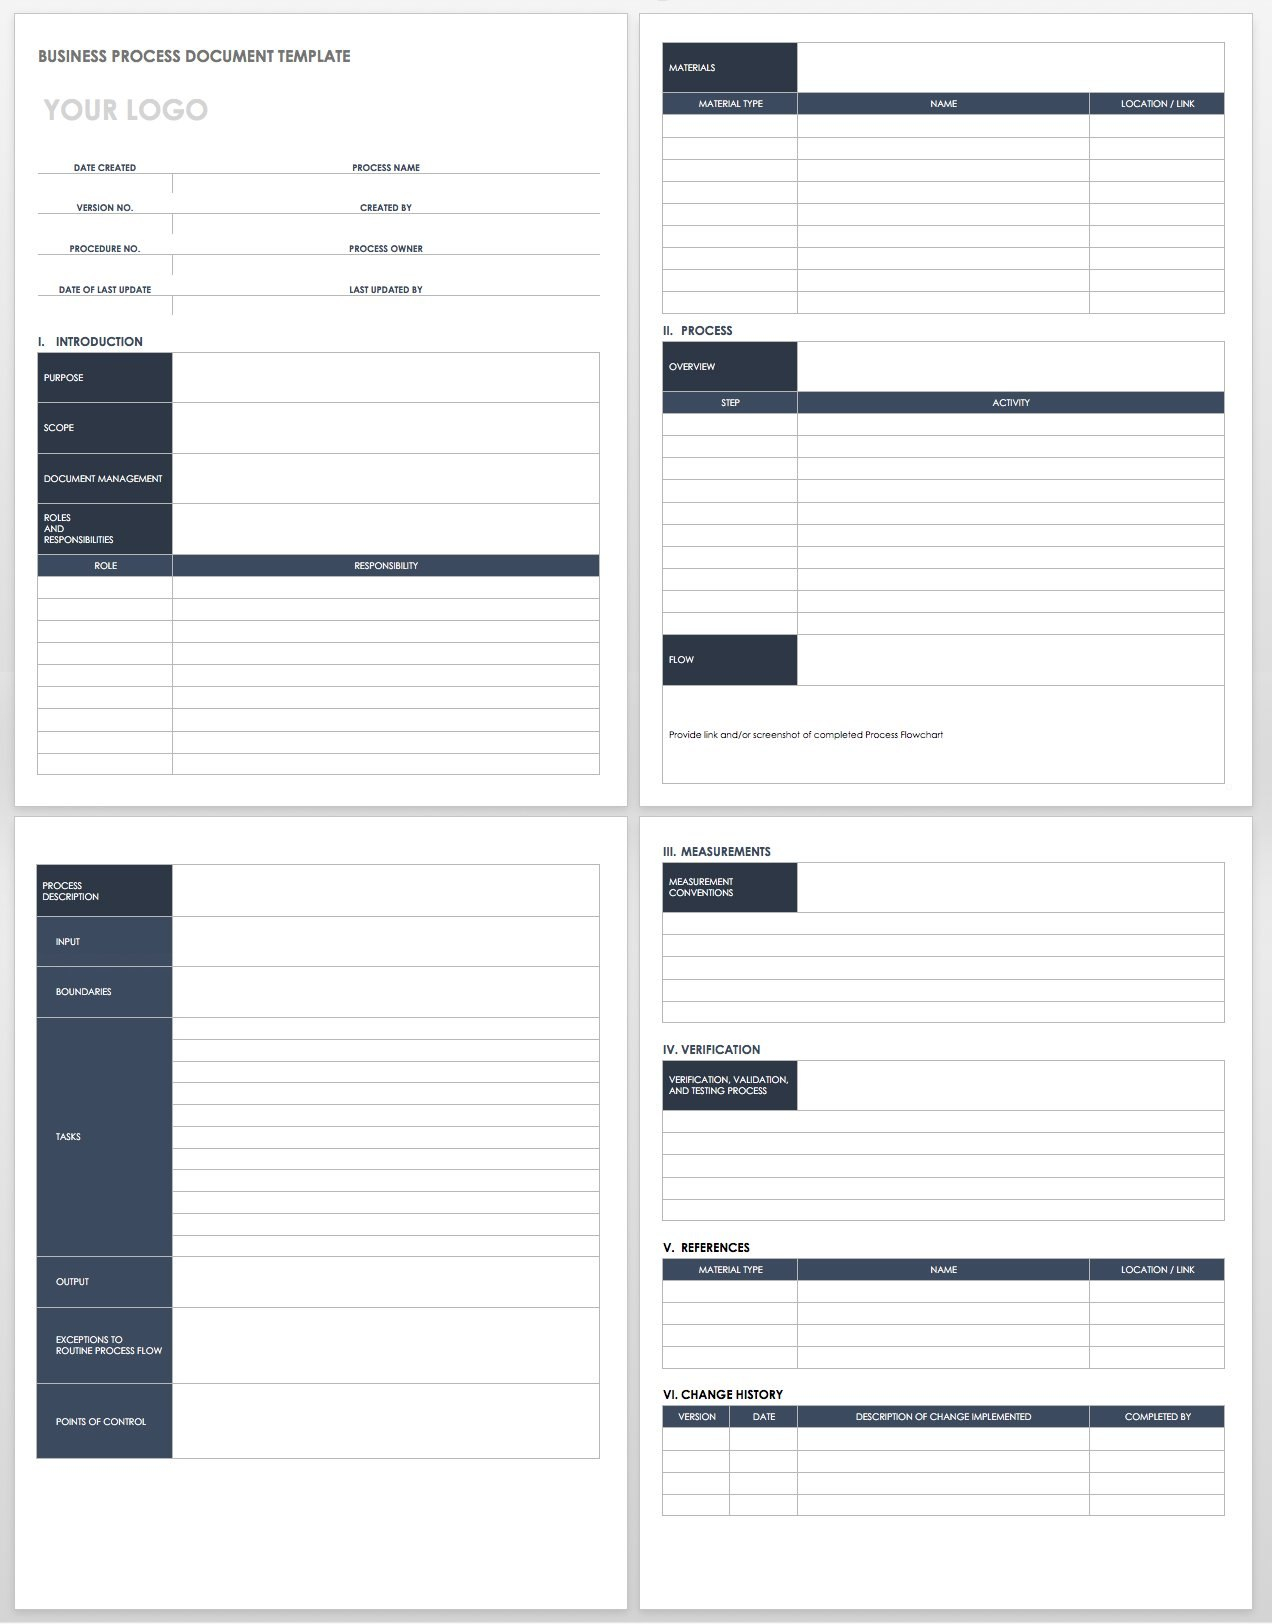 Free Process Document Templates  Smartsheet with regard to Business Process Catalogue Template